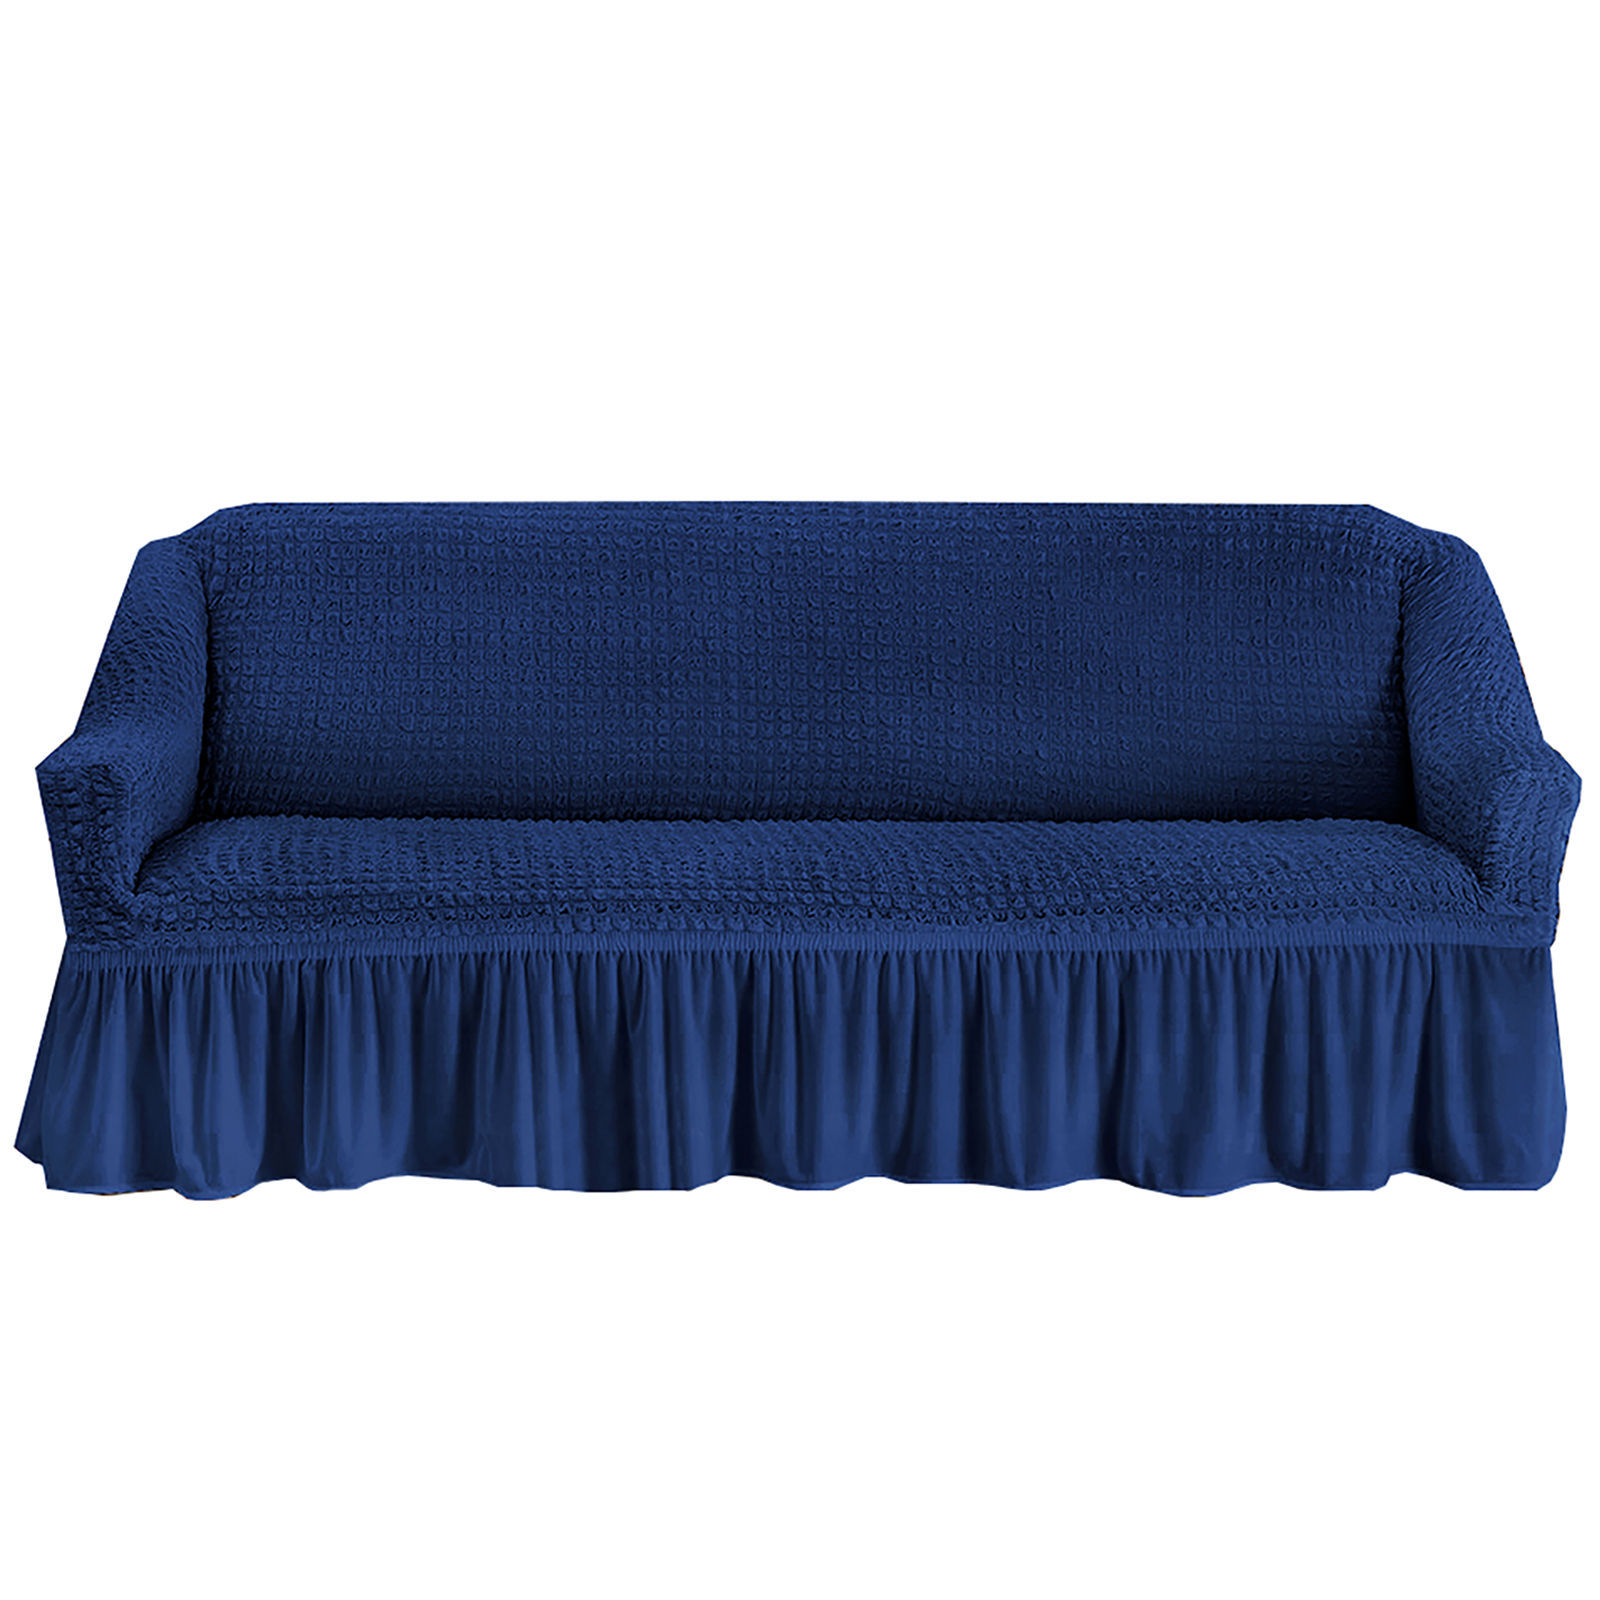 Stretch Sofa Slipcover, 3 Seater Sofa Slipcovers With Skirt With Armless Soft Sofa Cover Elastic Straps Sofa Slipcover For Living Room Kids Pets-blue-Large